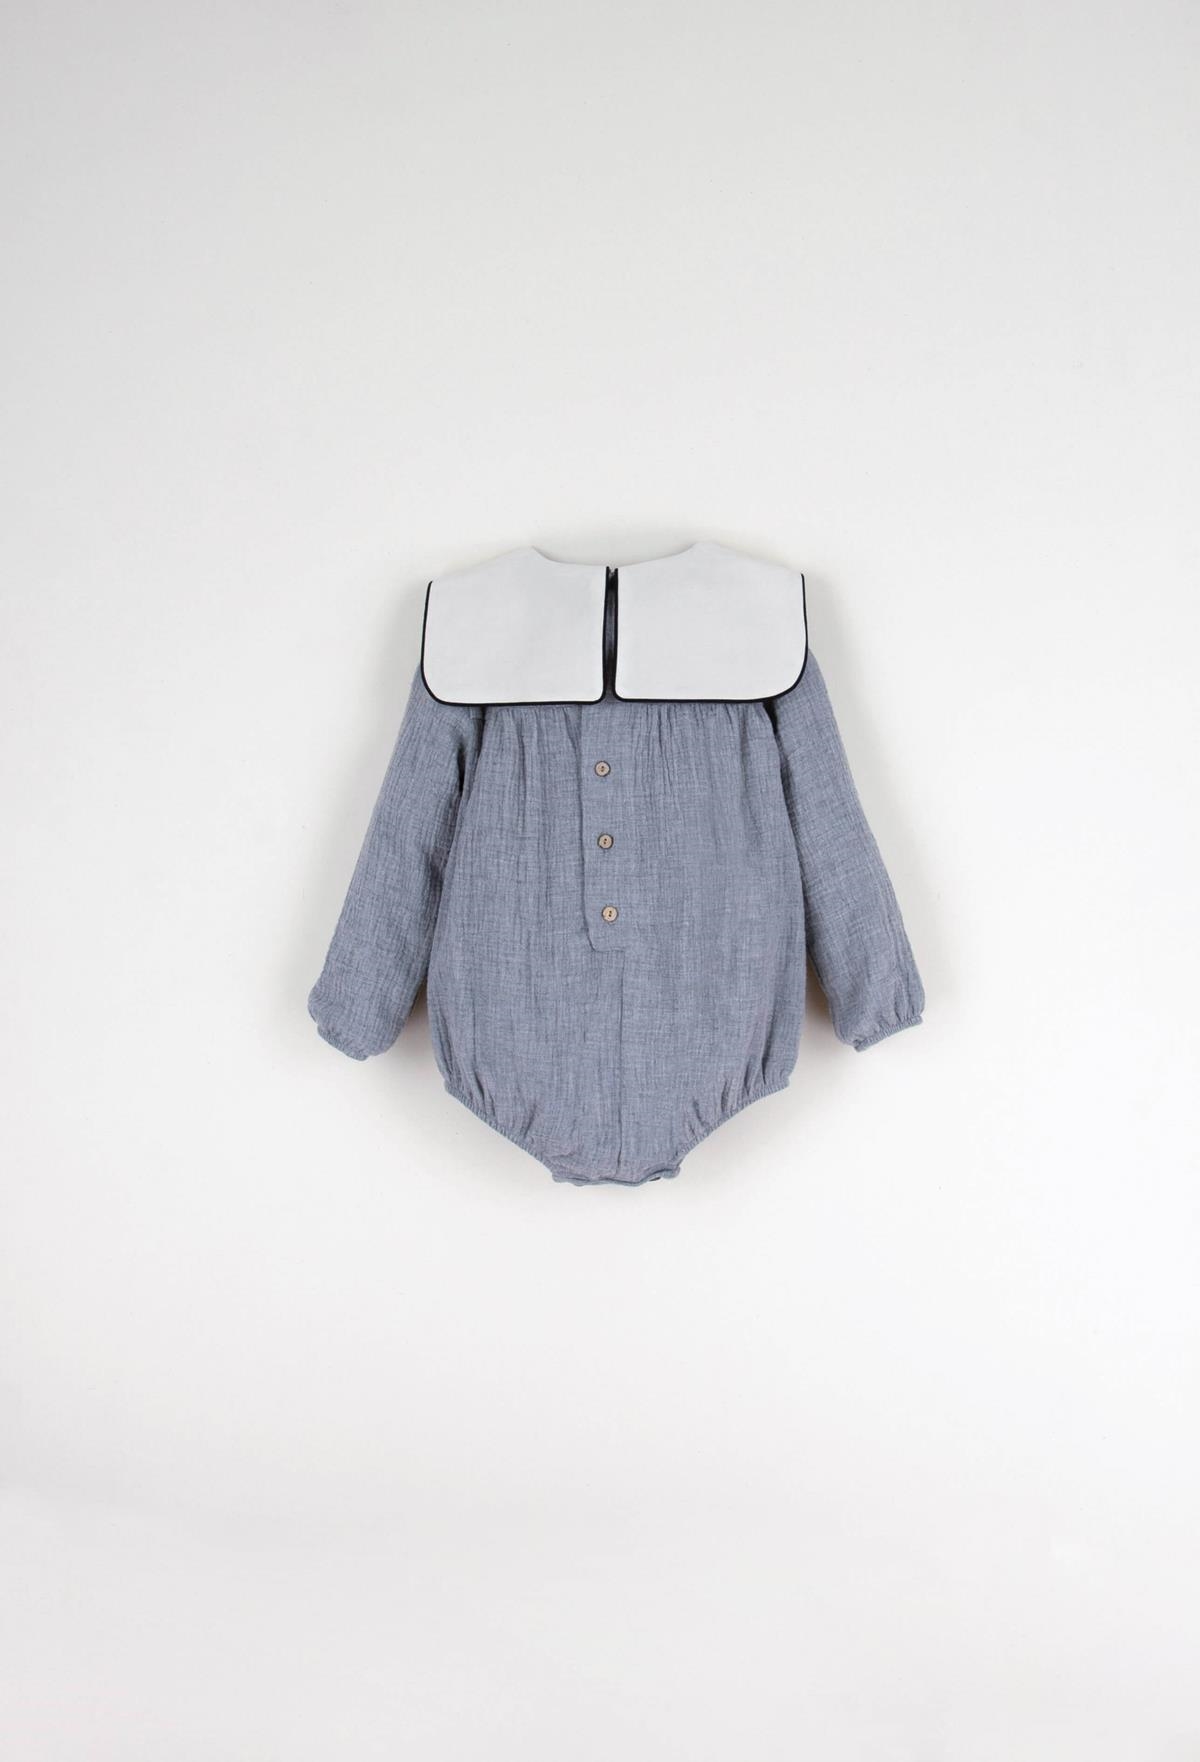 Mod.2.4 Light grey embroidered romper suit with yoke in organic fabric | AW22.23 Mod.2.4 Light grey embroidered romper suit with yoke in organic fabric